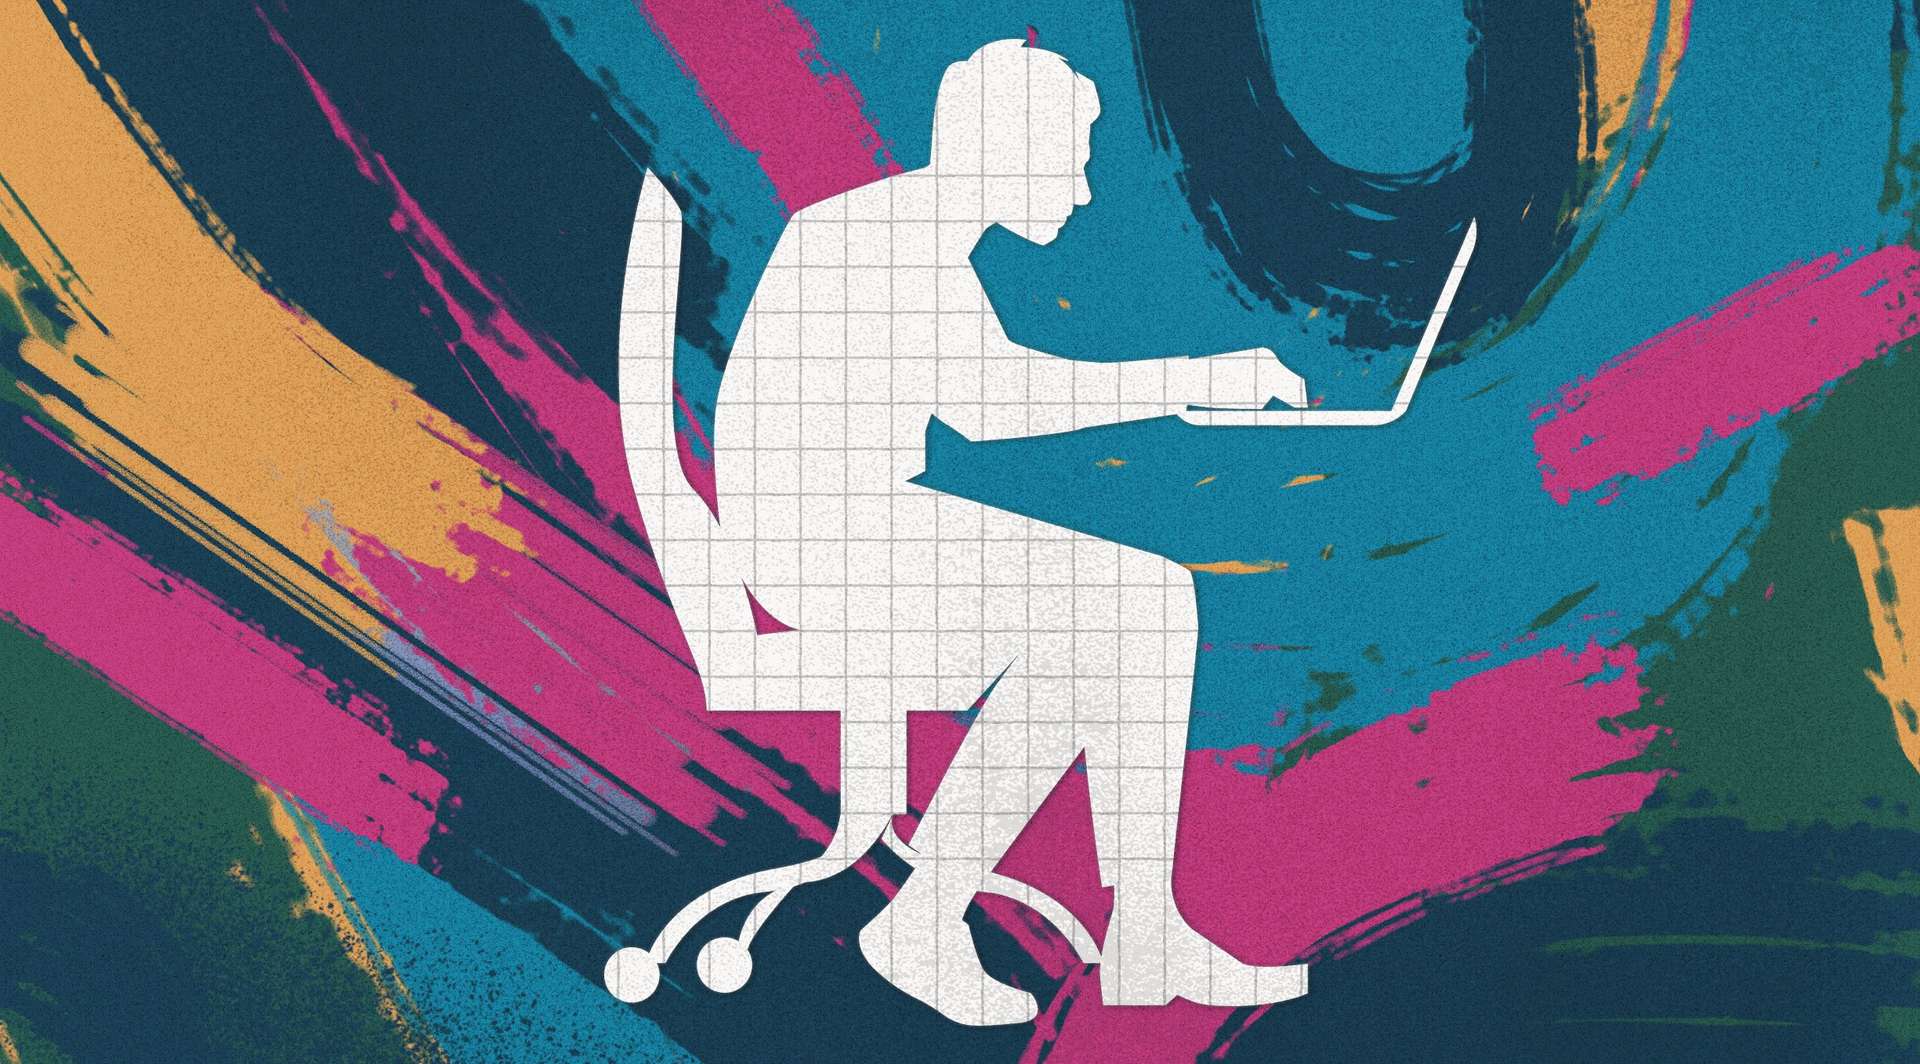 A person sits at a laptop, their silhouette resembling graph paper against a colorful abstract background of blues, greens, pinks, and yellows.